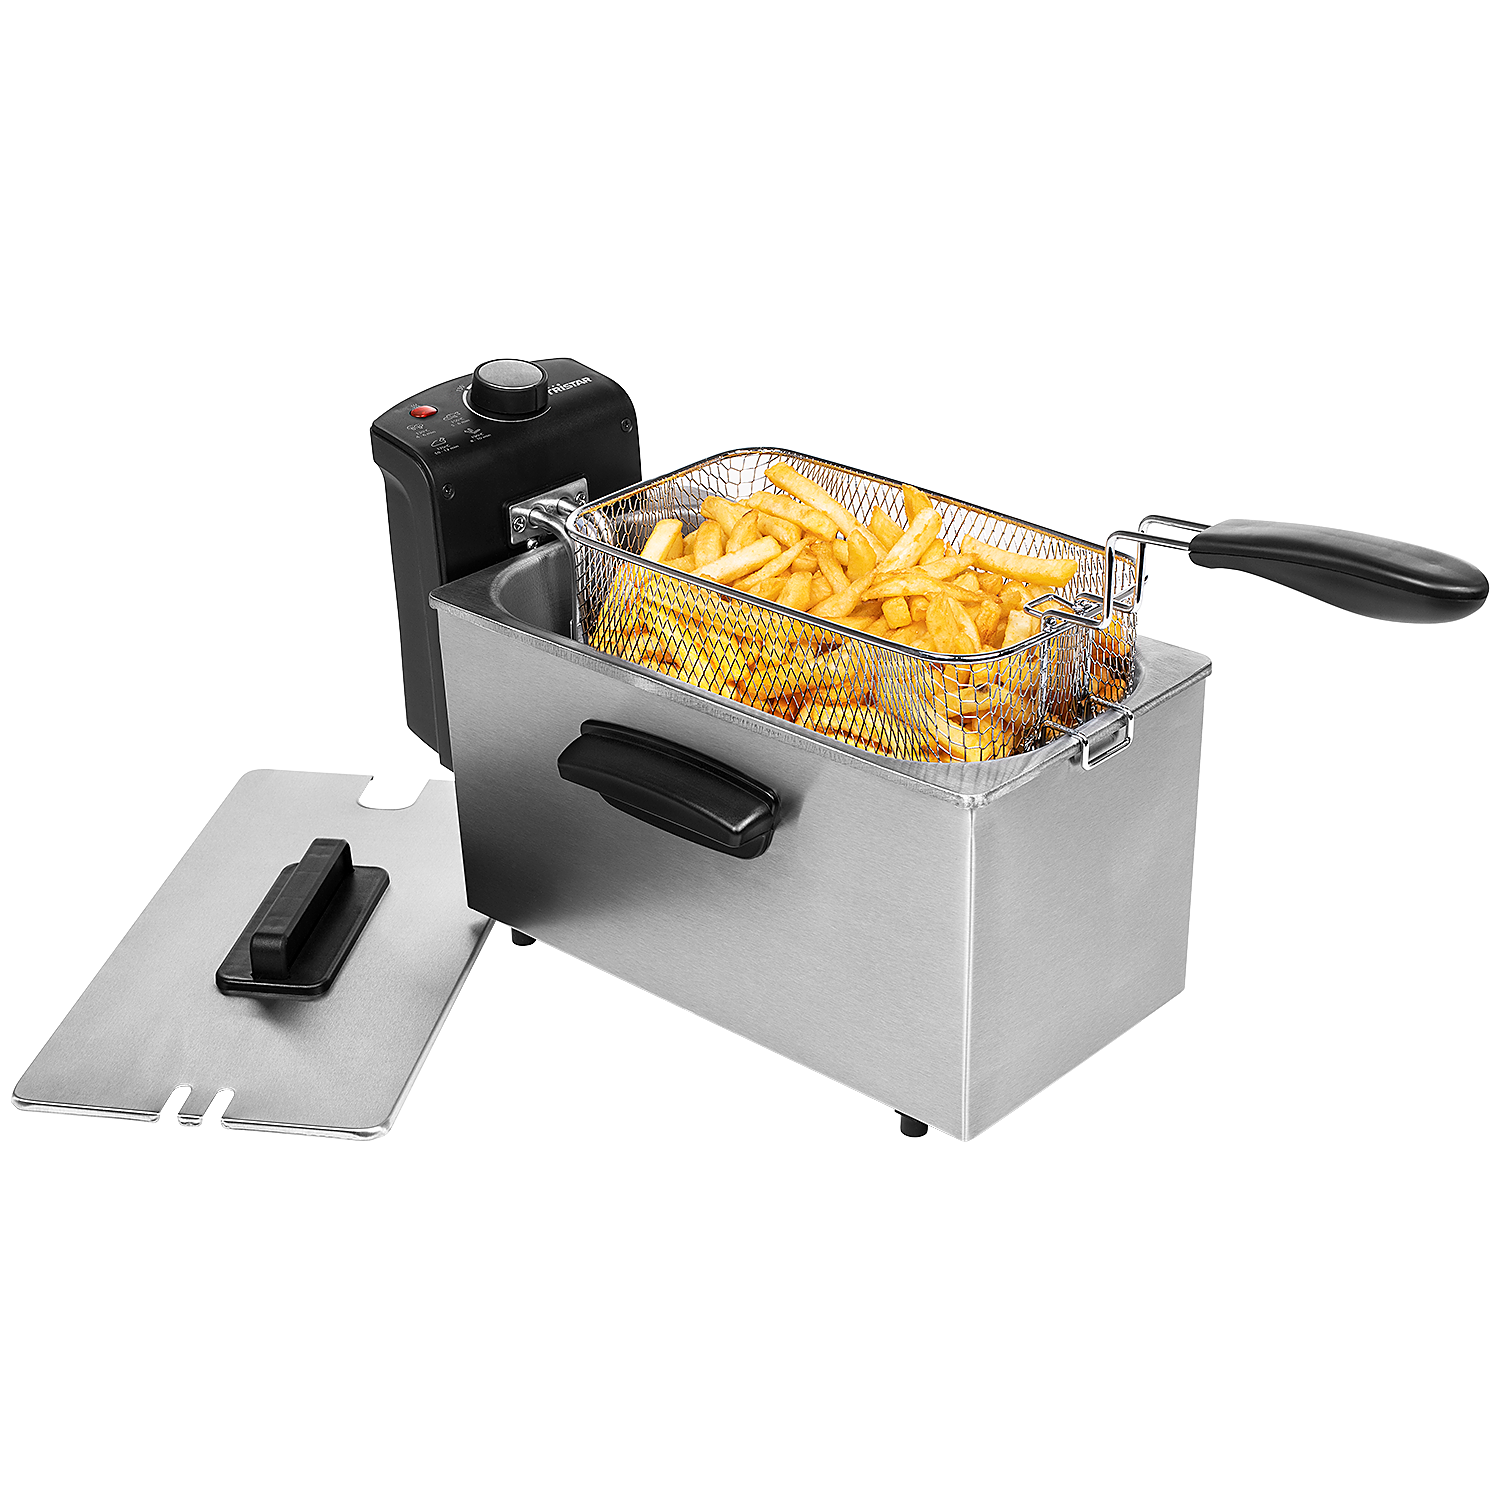 friteuse | Action.com